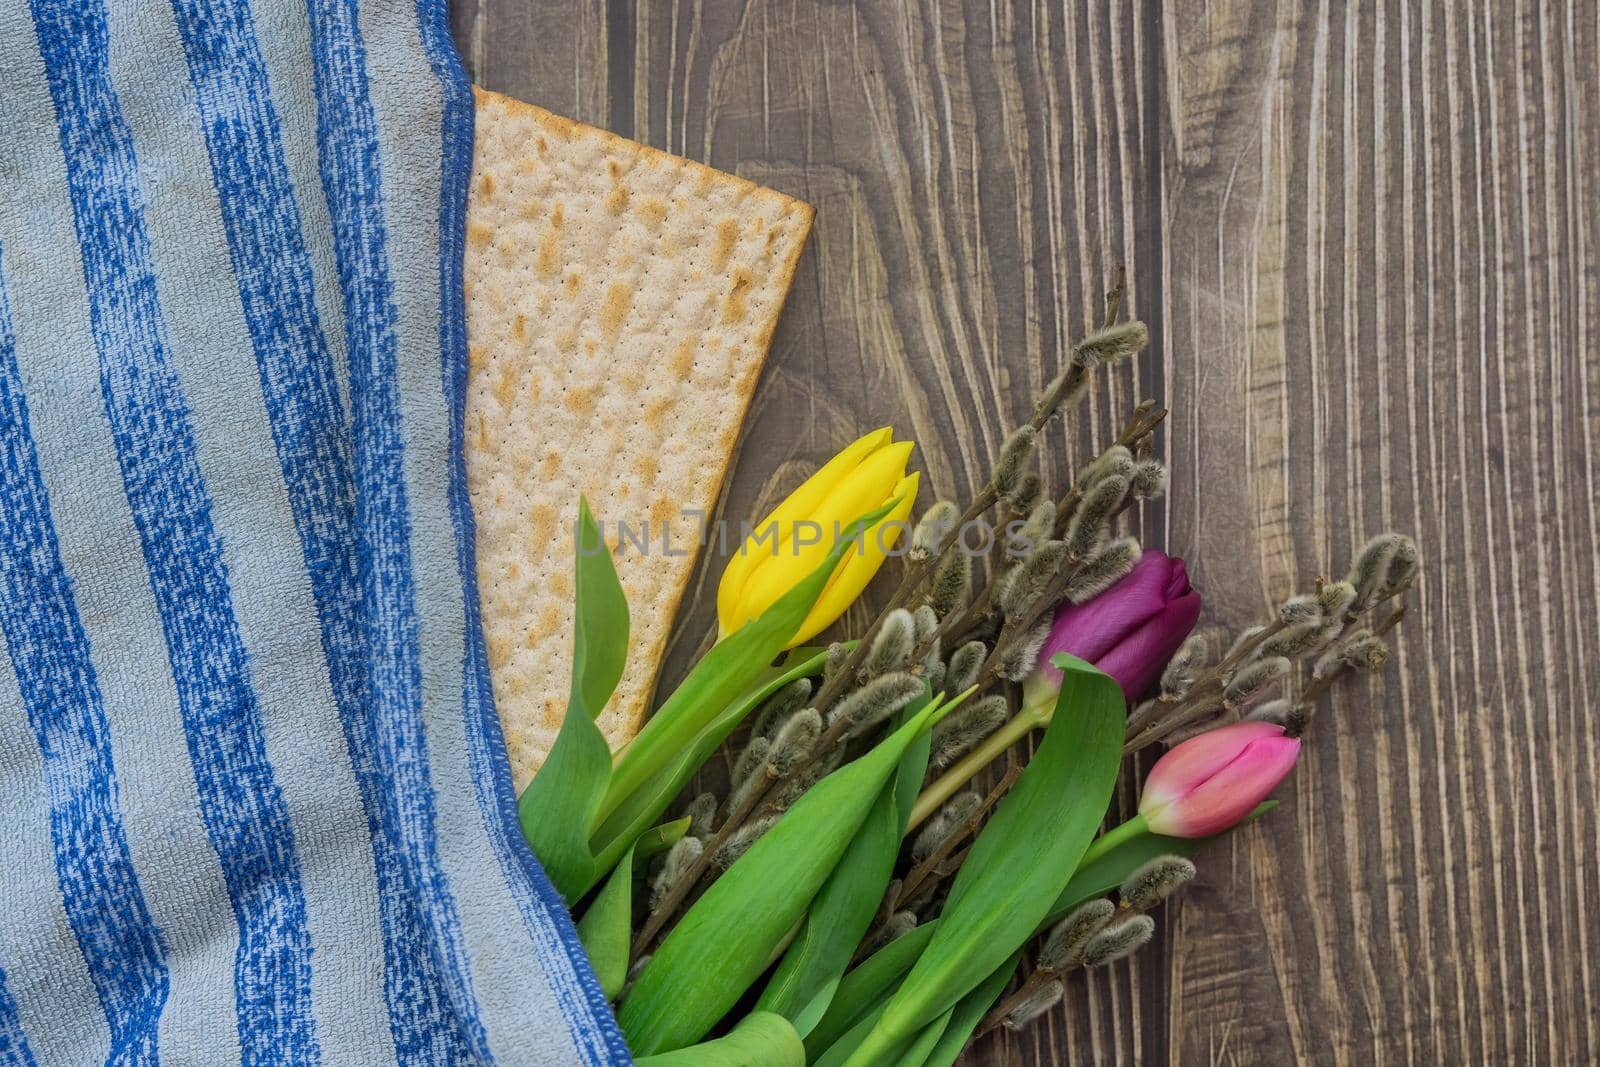 Blessings Pesach the ceremony ritual Jewish traditional holiday on Passover celebration of flowers and matzah bread